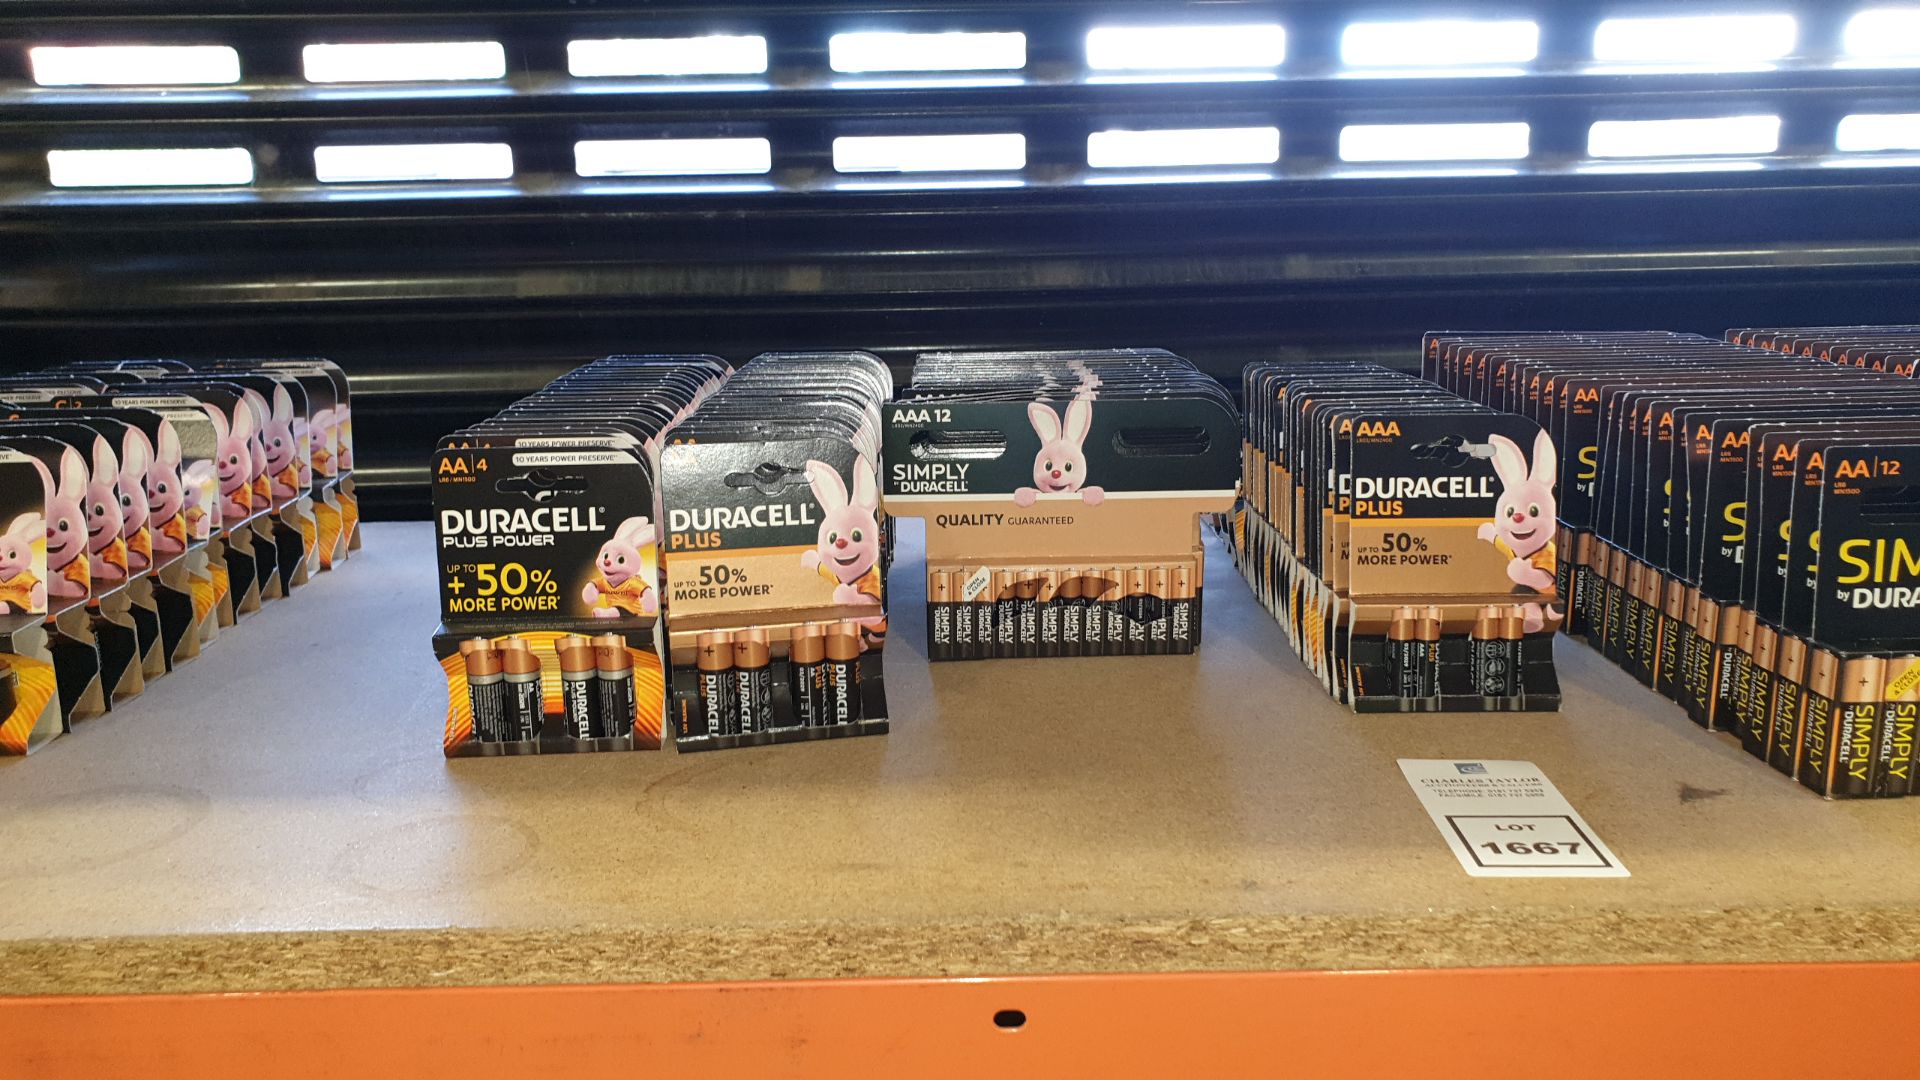 MISC LOT OF DURACELL BATTERIES (BRAND NEW AND IN ORIGINAL PACKAGING) - 45 X PKS AA, 42 X PKS AAA